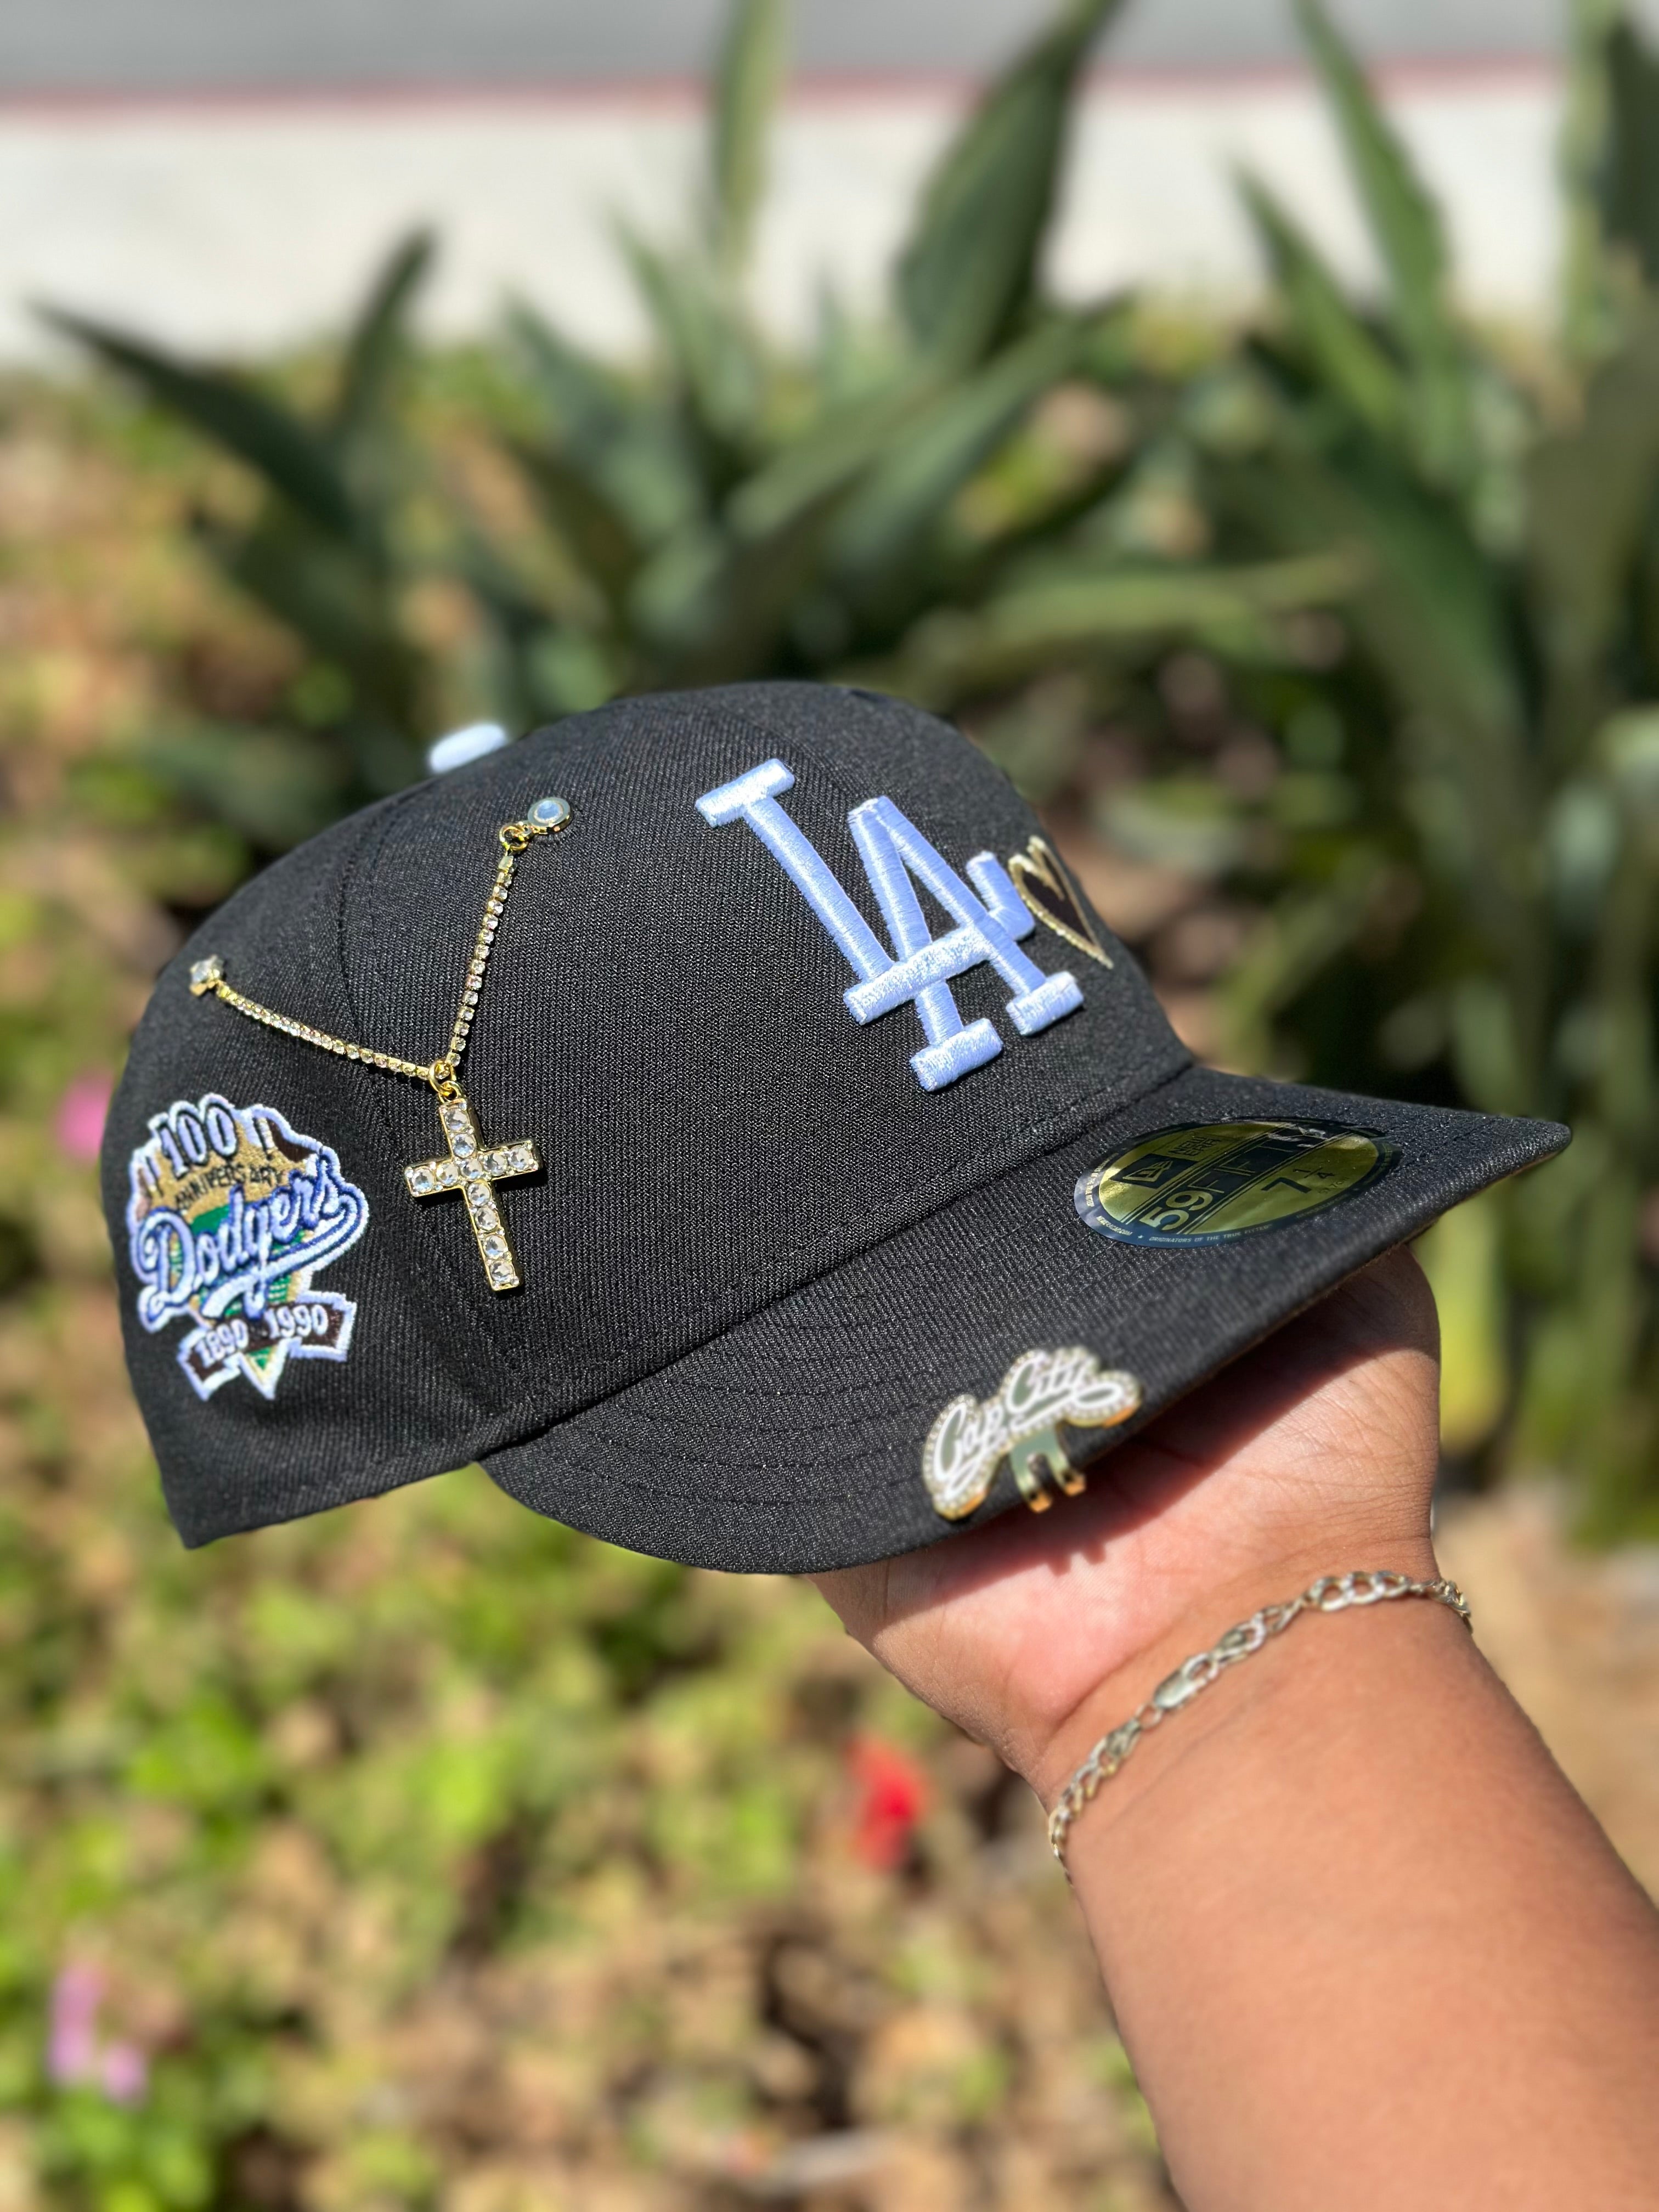 NEW ERA EXCLUSIVE 59FIFTY BLACK LOS ANGELES DODGERS W/ MOCHA HEART + 100TH ANNIVERSARY SIDE PATCH